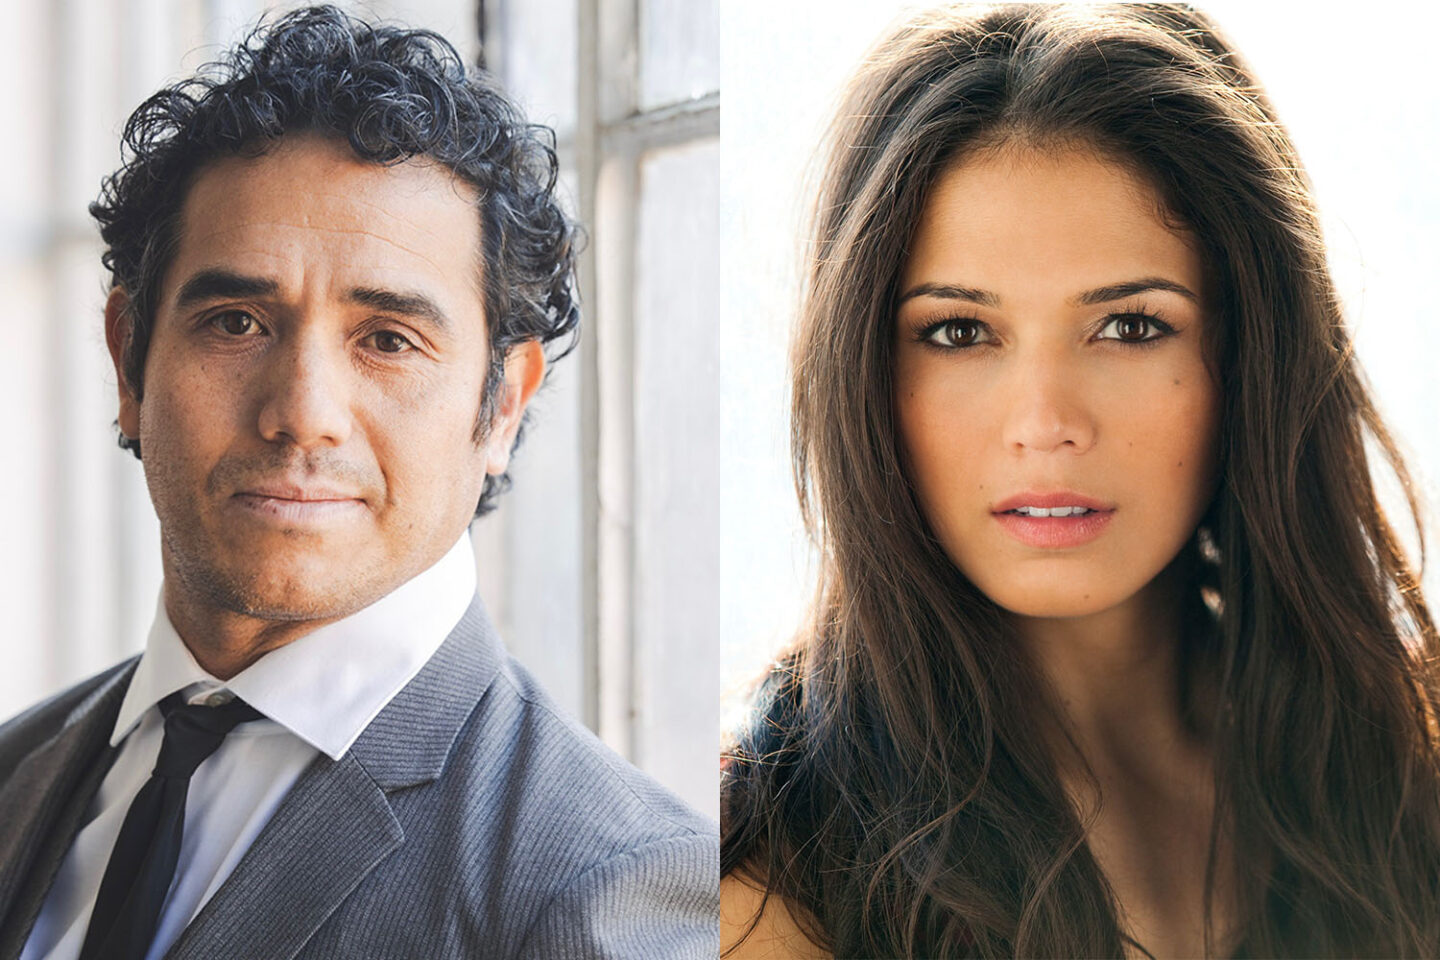 Adam Jacobs and Arielle Jacobs headshots side-by-side